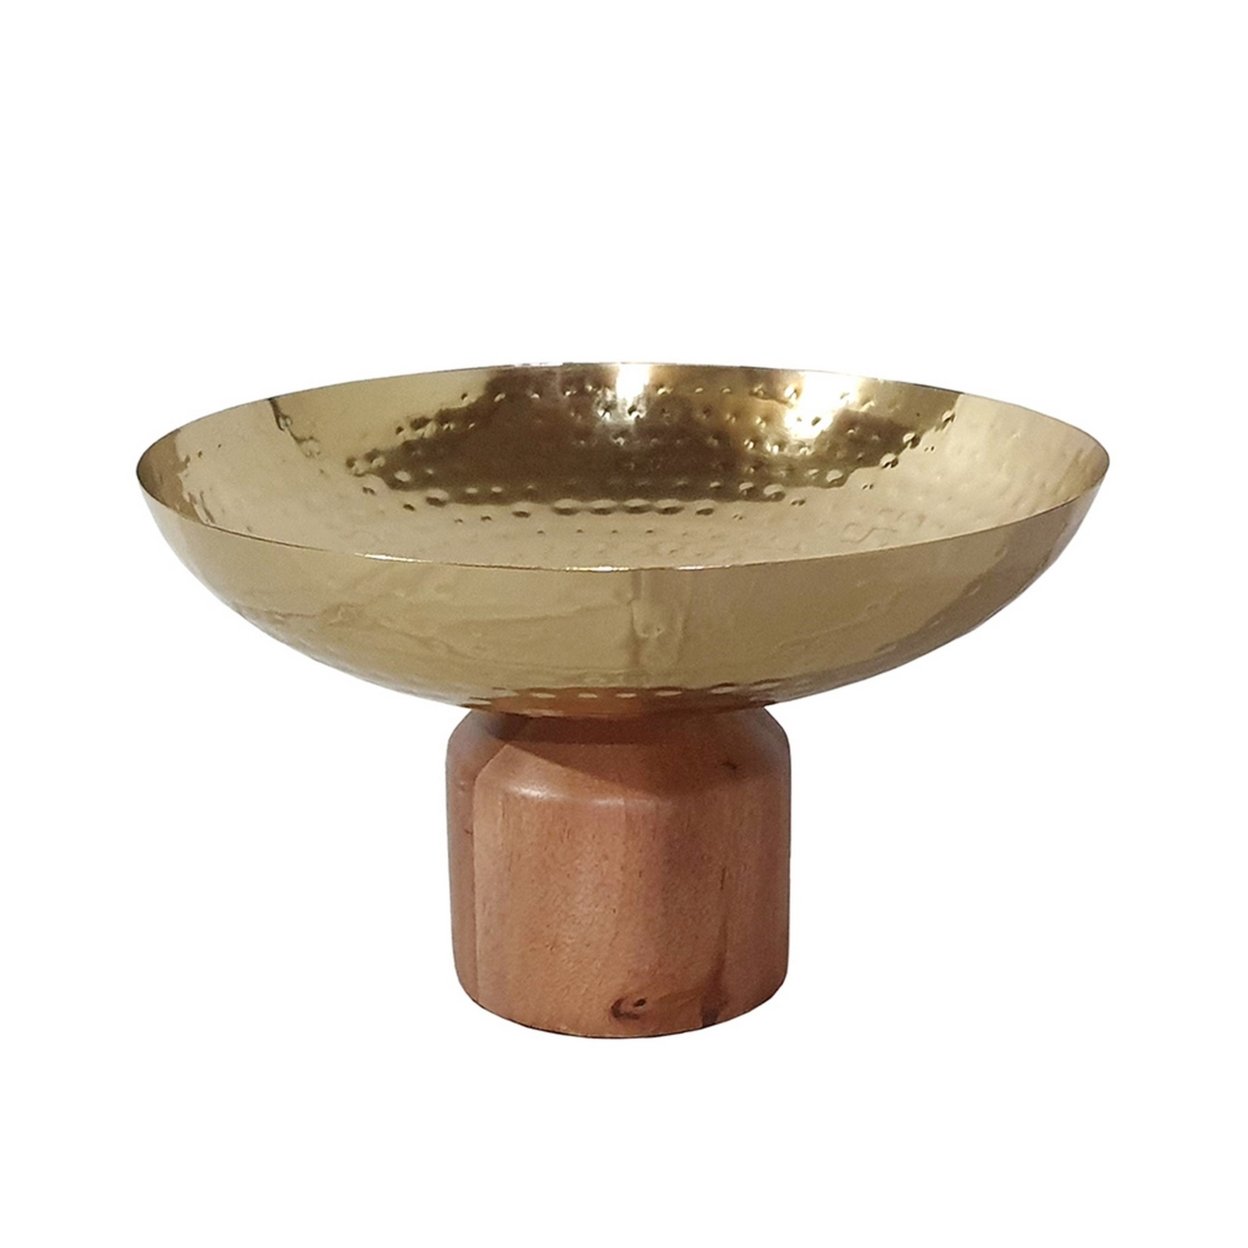 Roe 12 Inch Large Acacia Wood Table Bowl, Steel, Decorative, Gold And Brown- Saltoro Sherpi